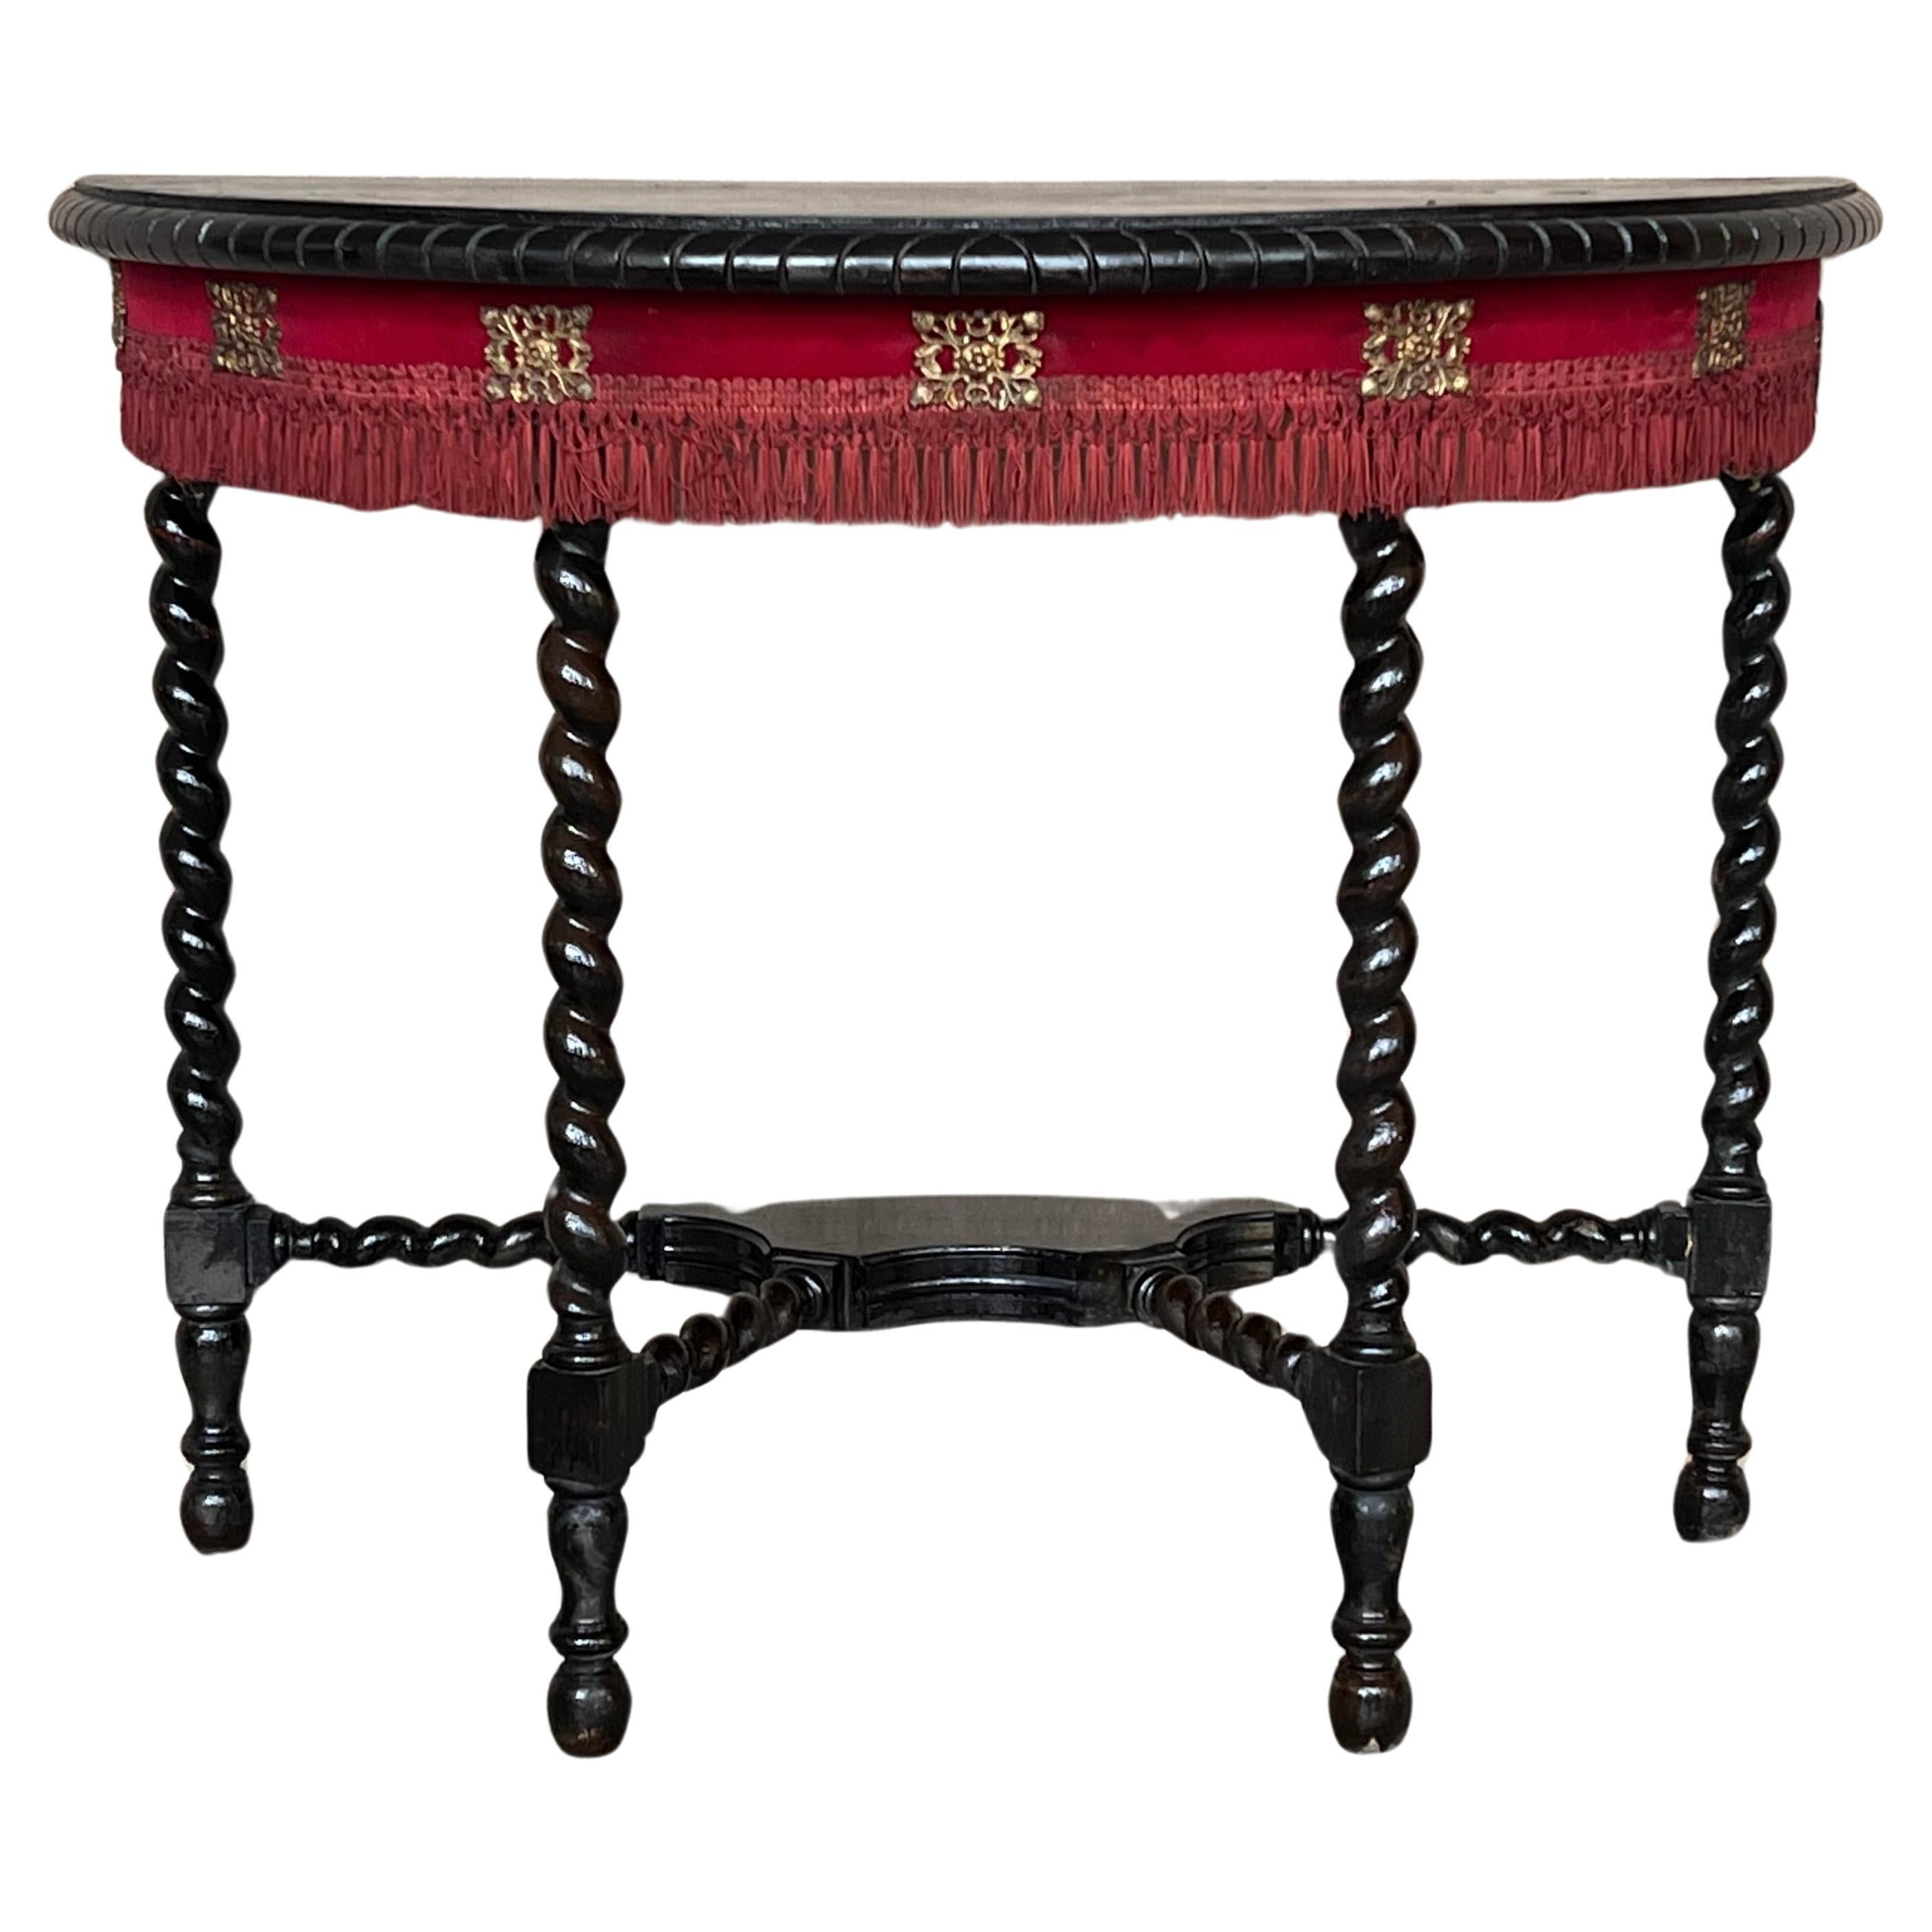 19th Century English Demilune Table with Solomonic Legs and Fringes